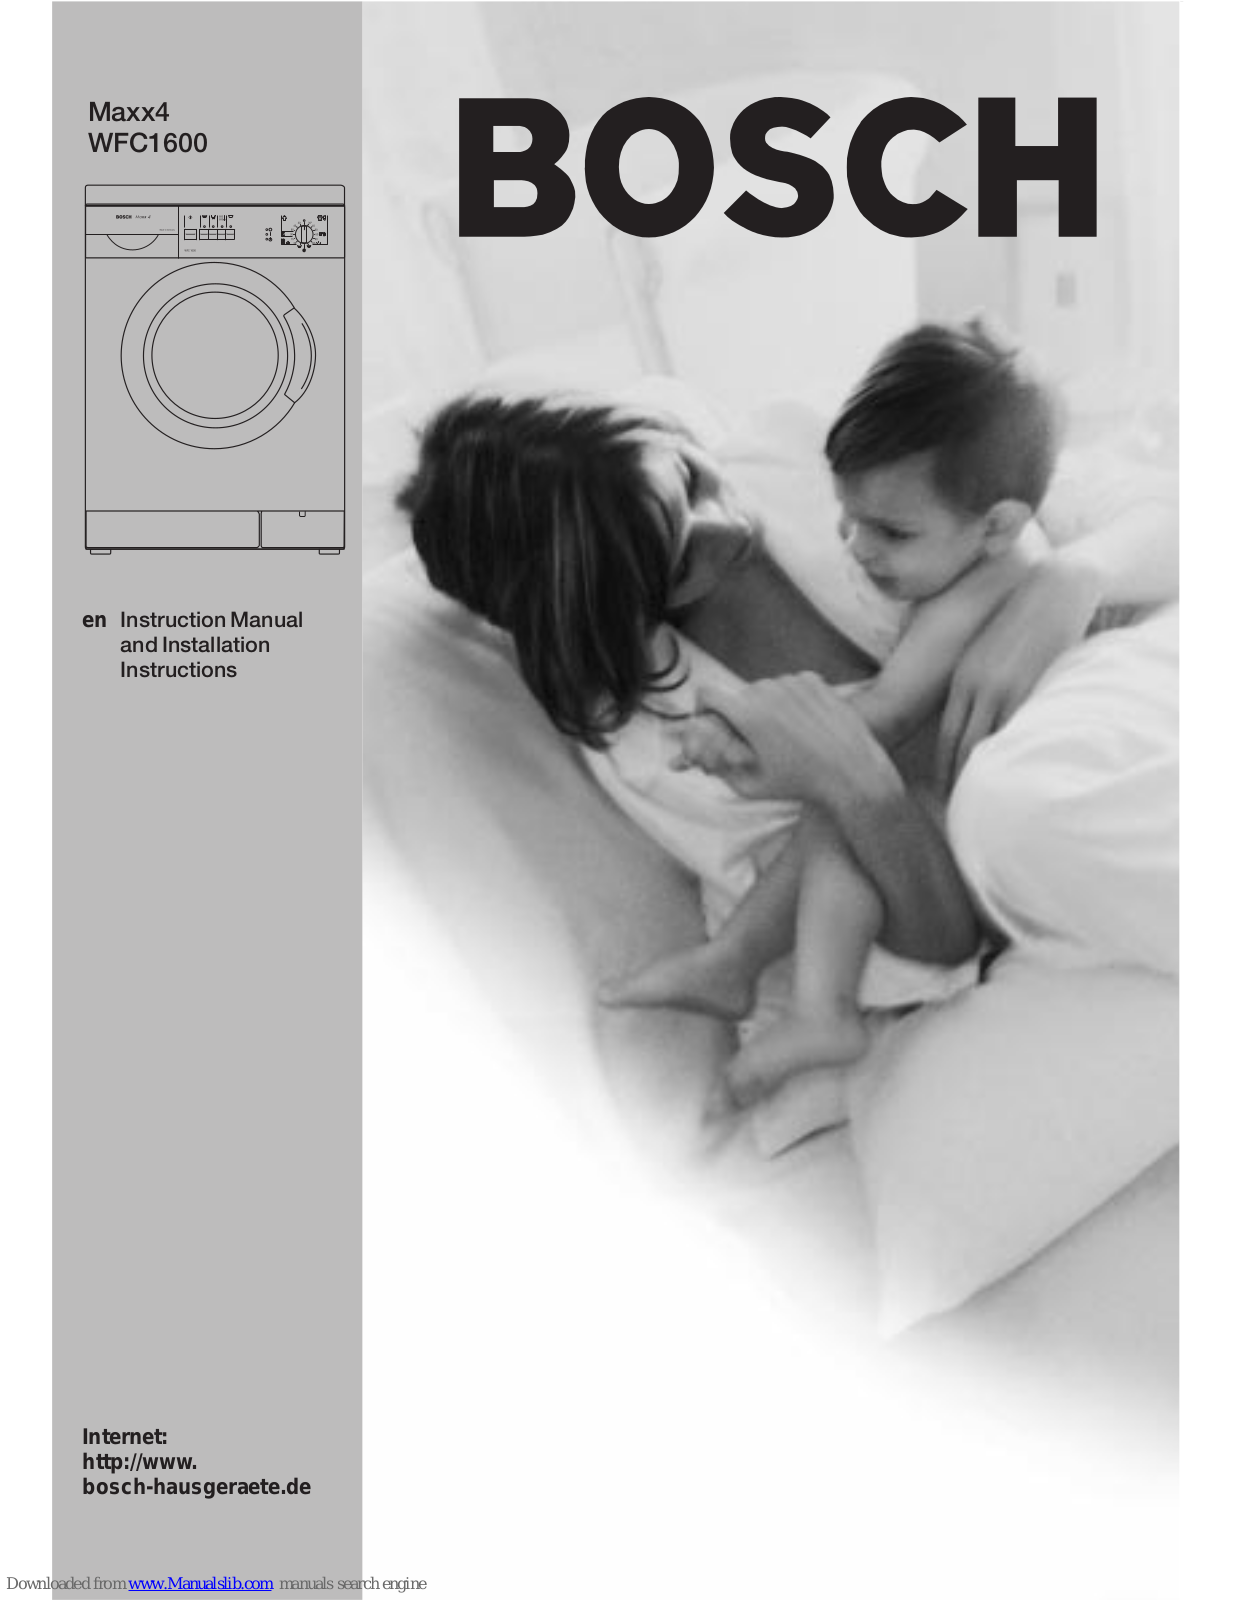 Bosch Maxx4 WFC1600 Instruction Manual And Installation Instructions